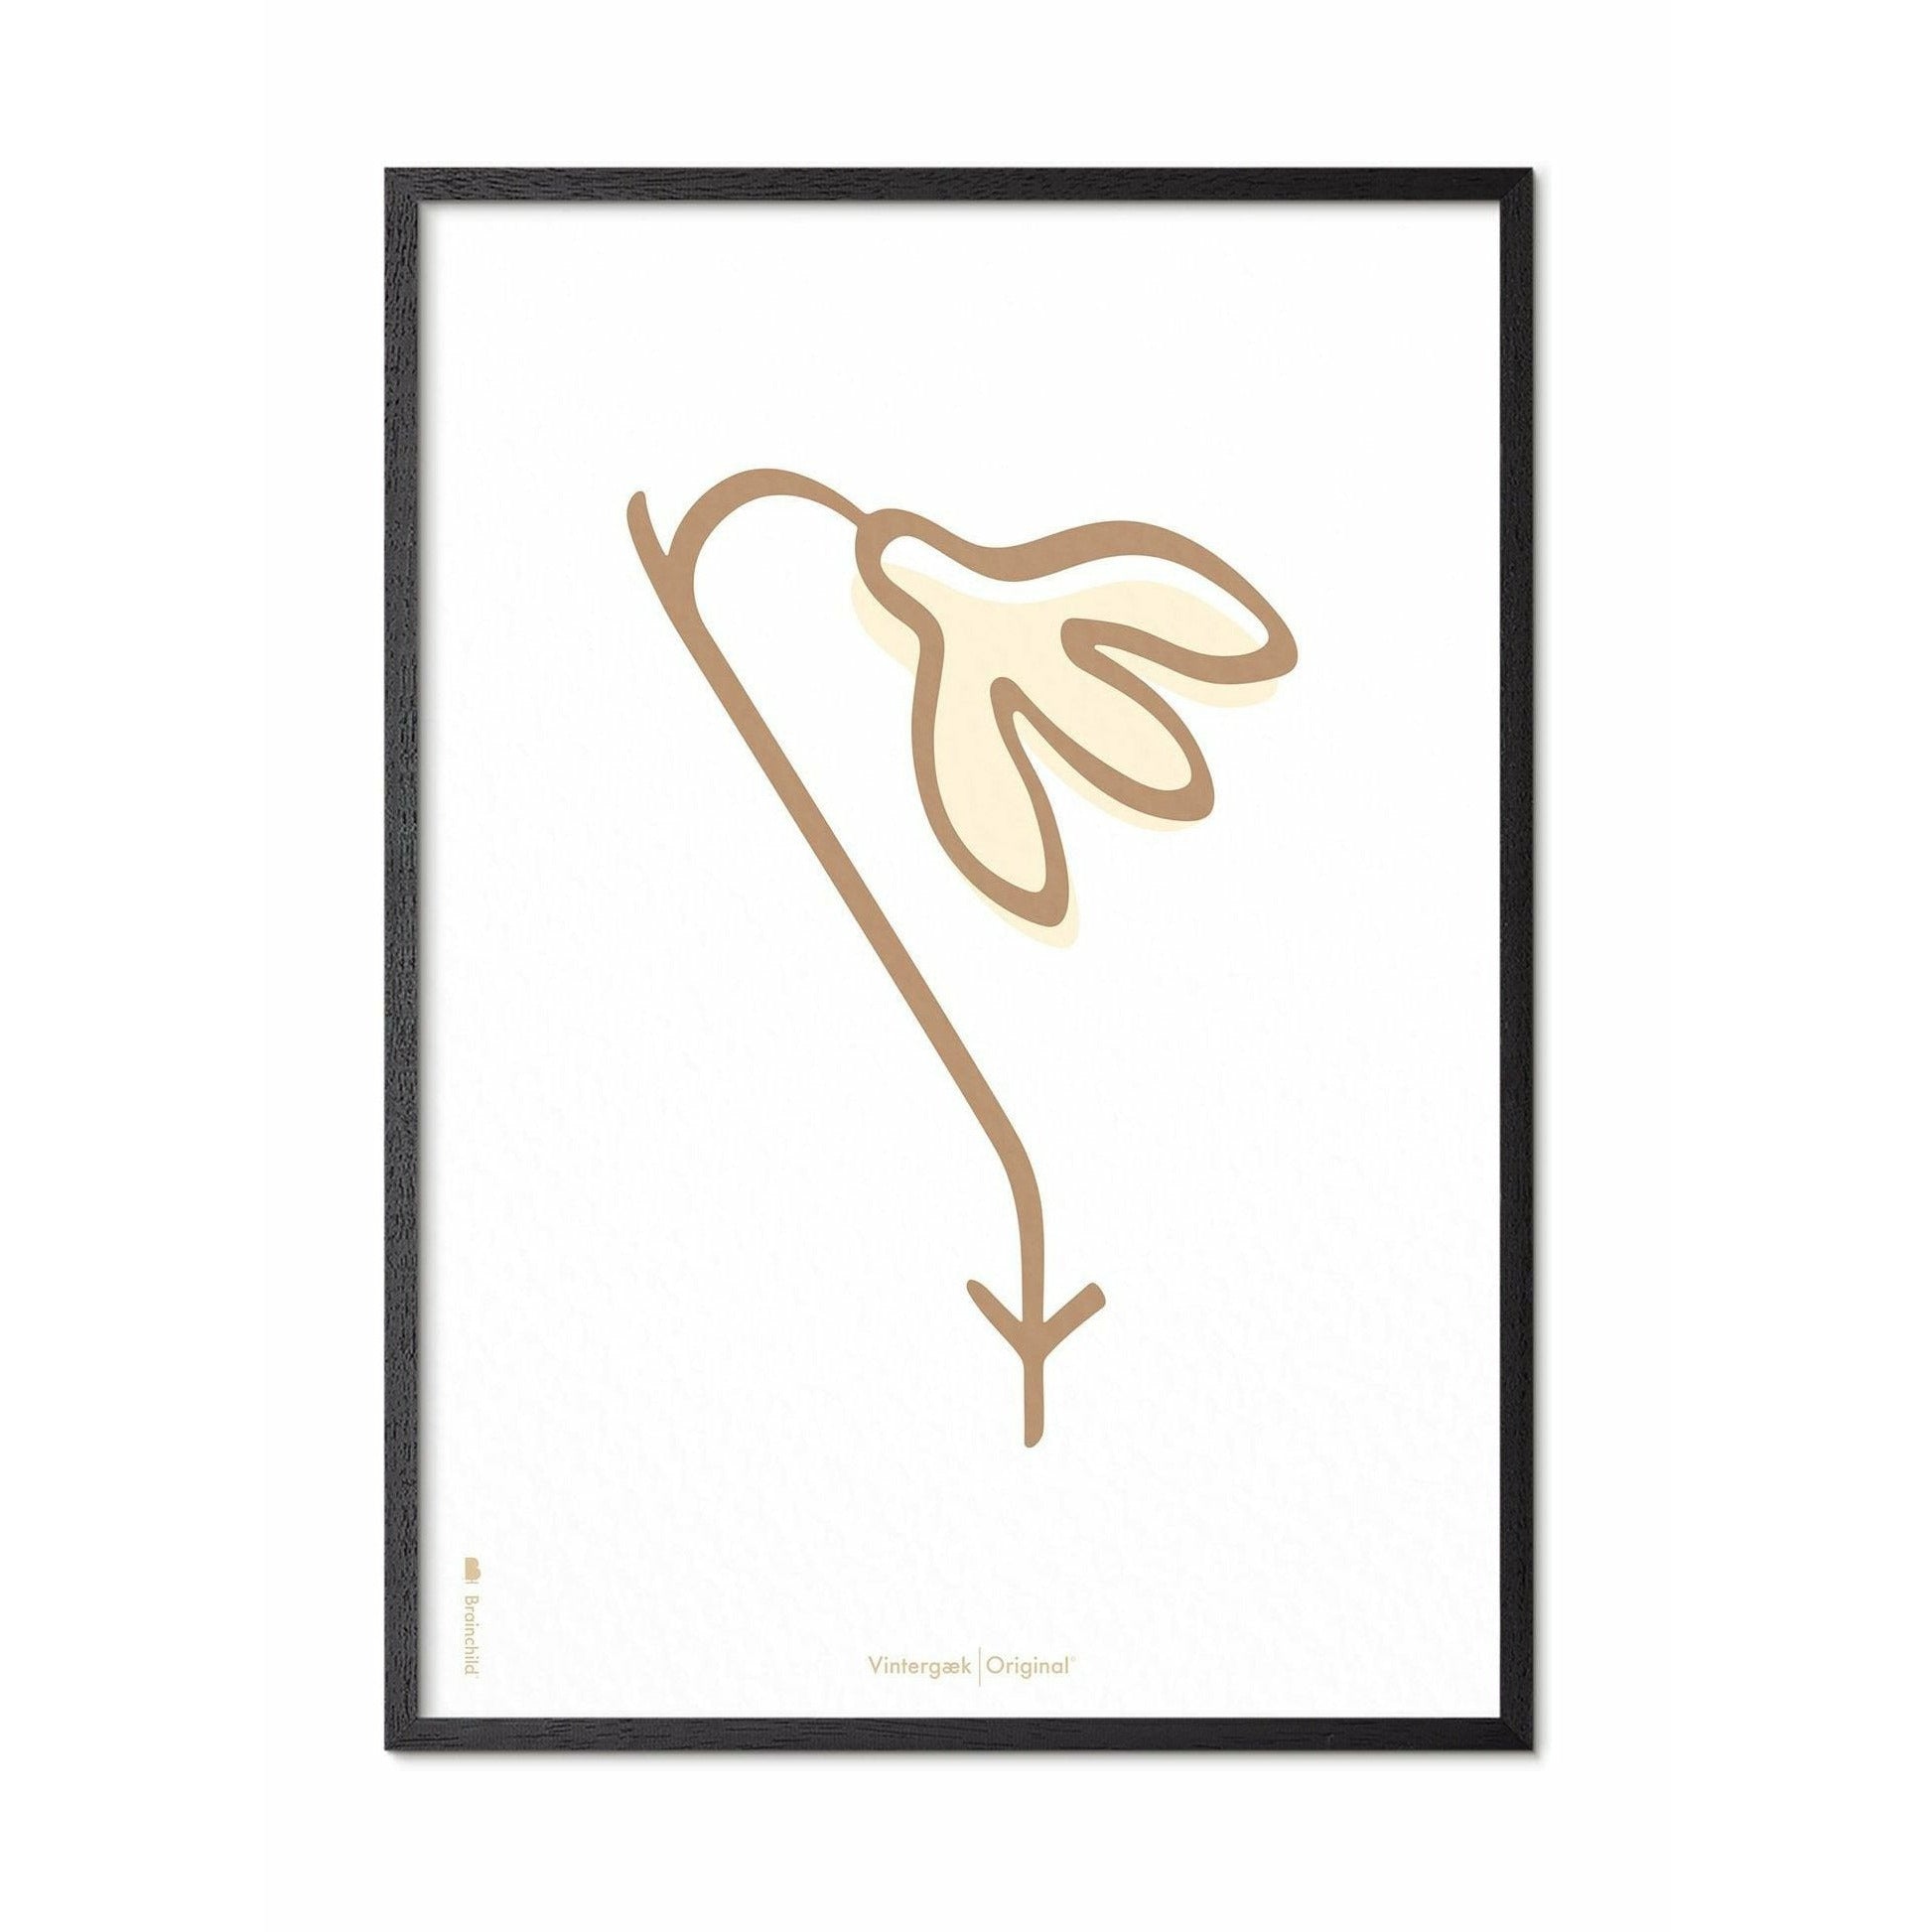 Brainchild Snowdrop Line Poster, Frame In Black Lacquered Wood 30x40 Cm, White Background